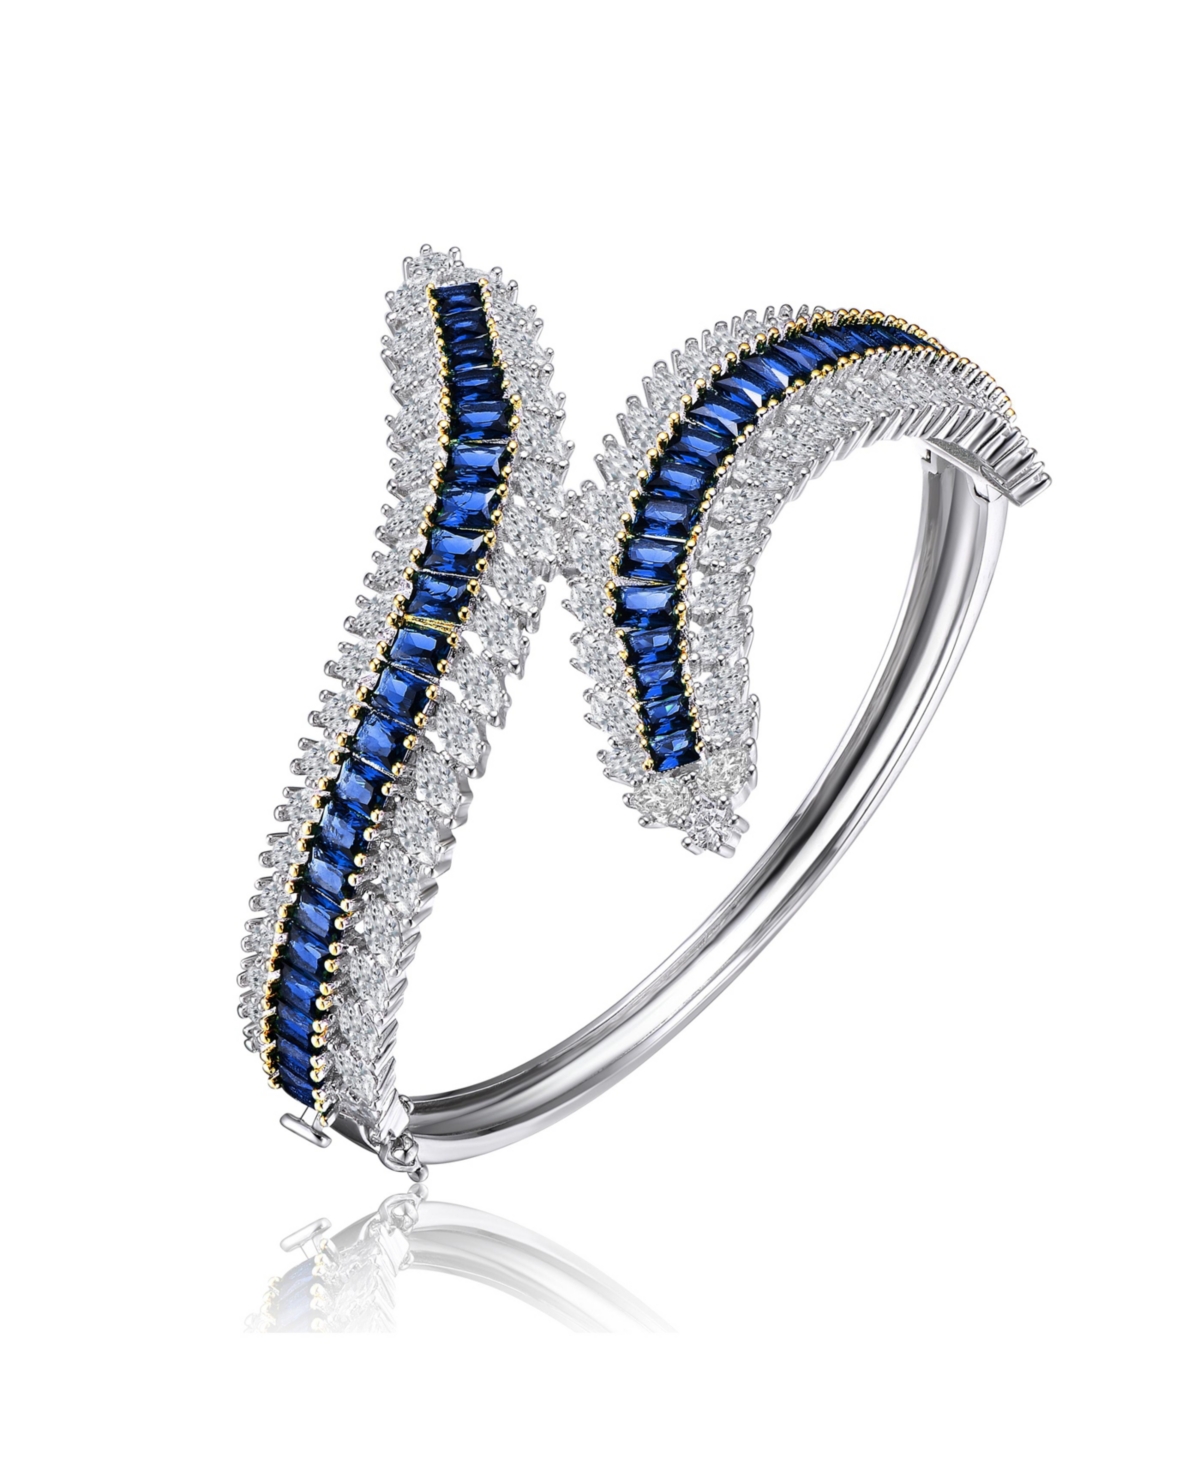 Sterling Silver Rhodium Plated with Sapphire Cubic Zirconia Bangle Bracelet - Sapphire